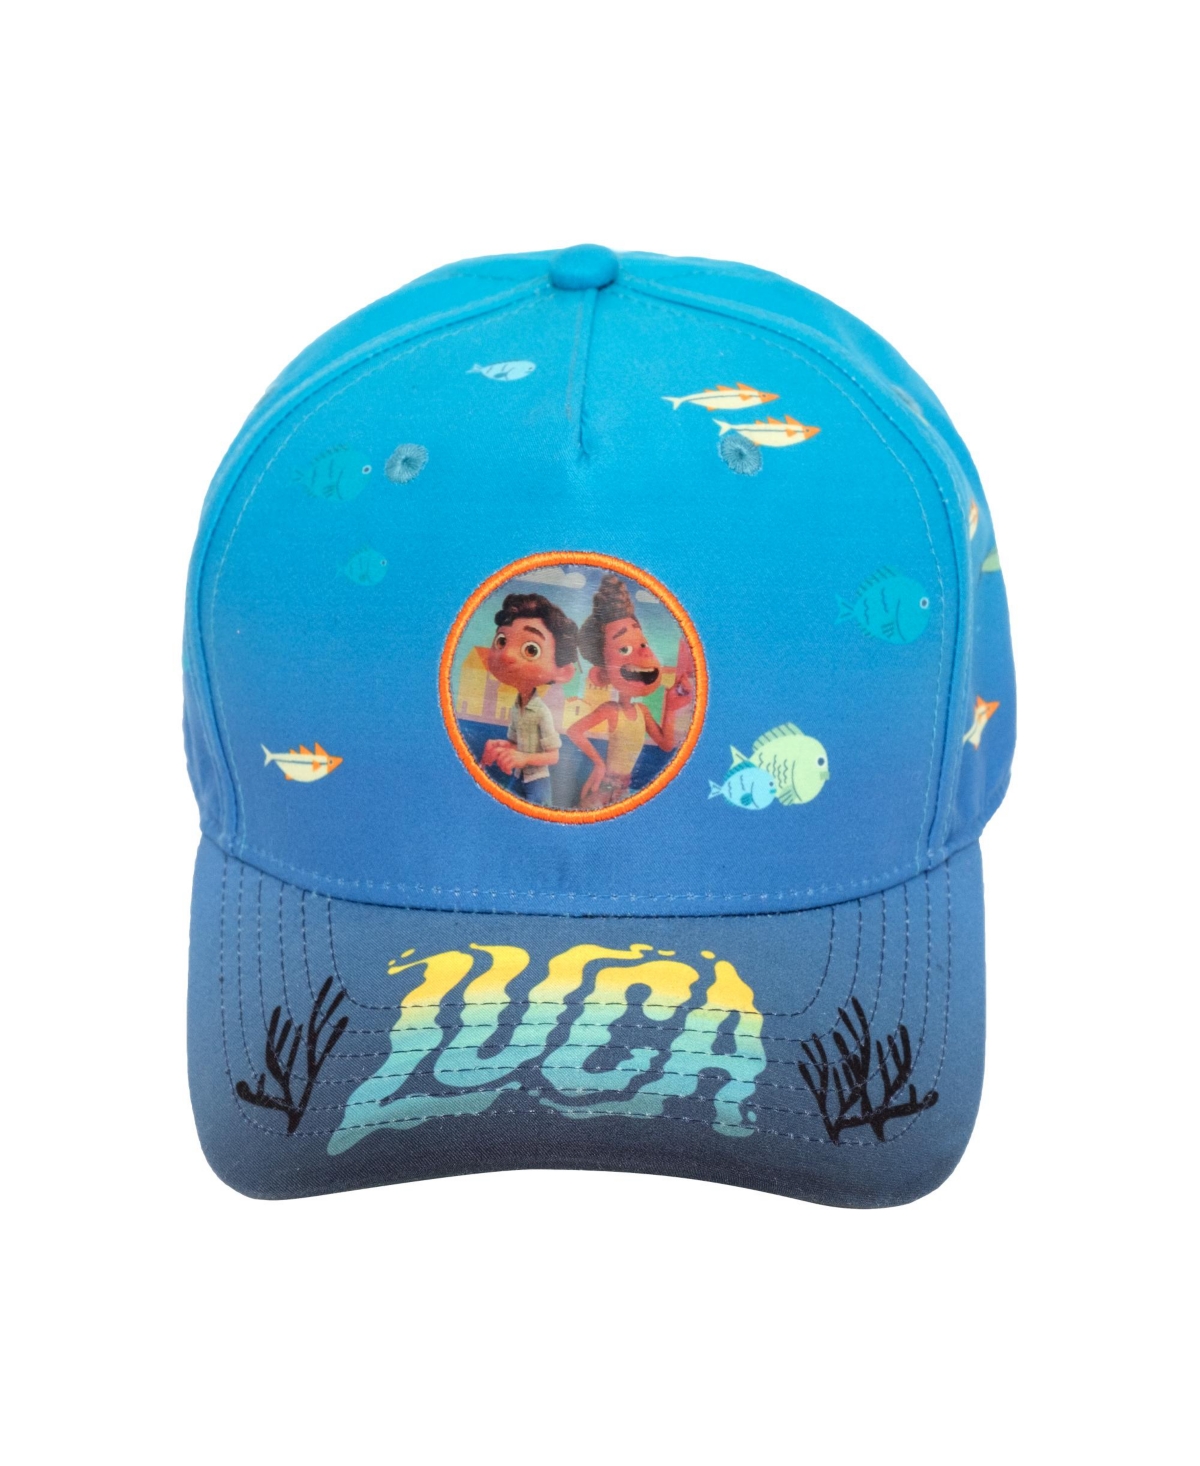 Disney Concept One 's Pixar Luca Cotton Adjustable Child Baseball Hat With Curved Brim And Embroidere In Blue